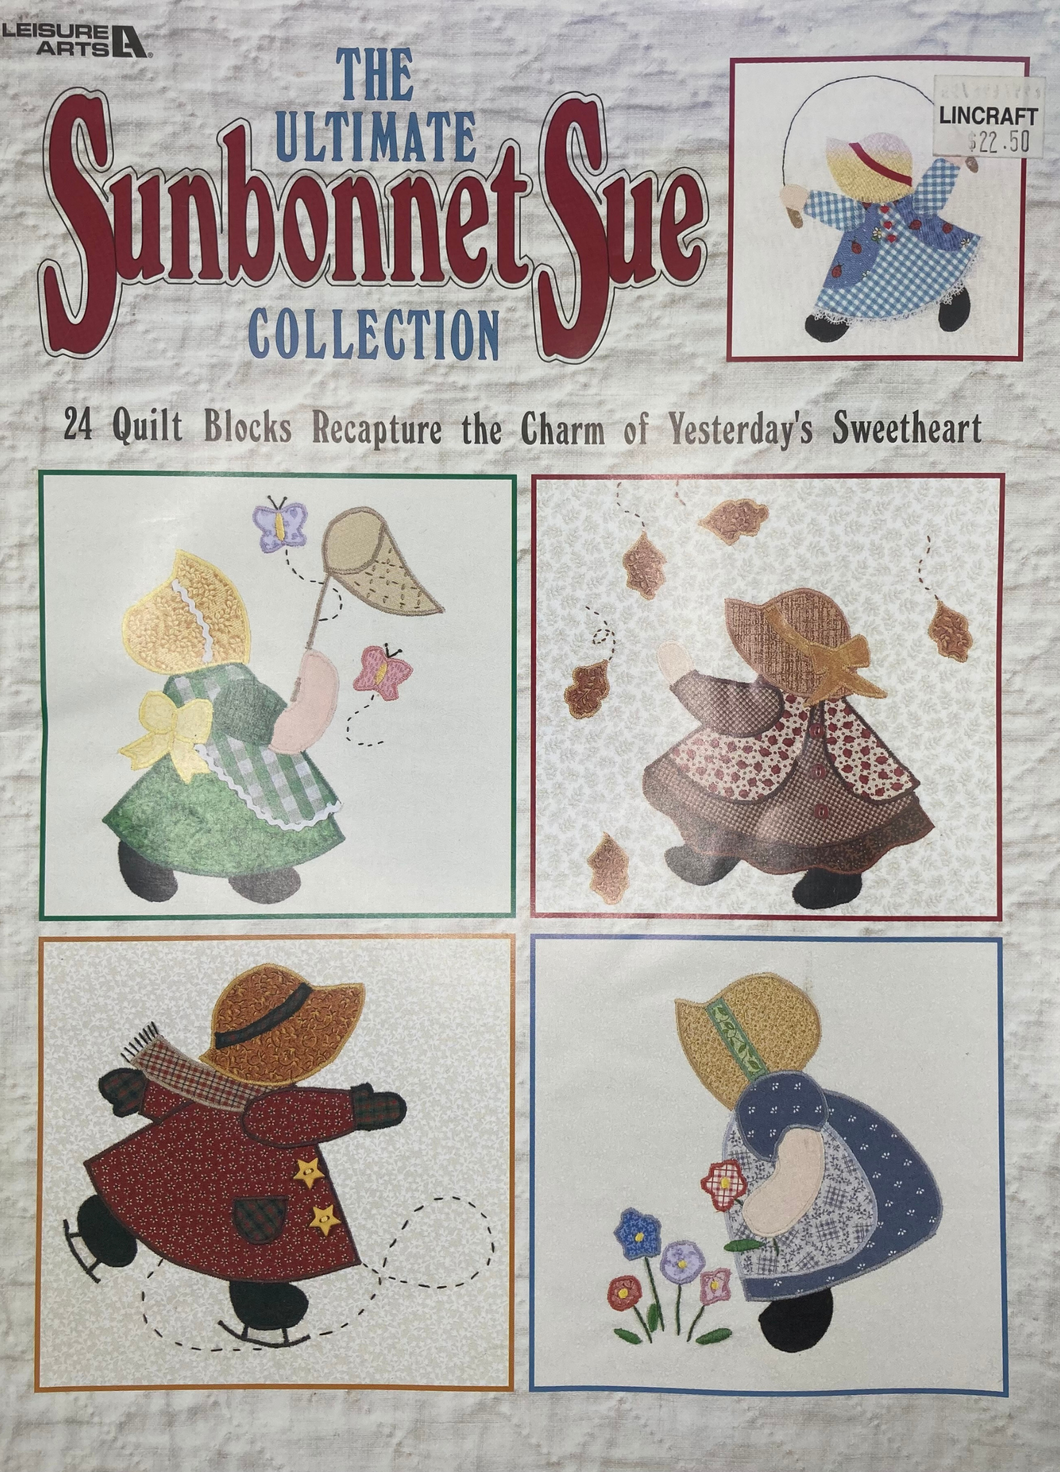 The Ultimate Sunbonnet Sue Collection by Leisure Arts